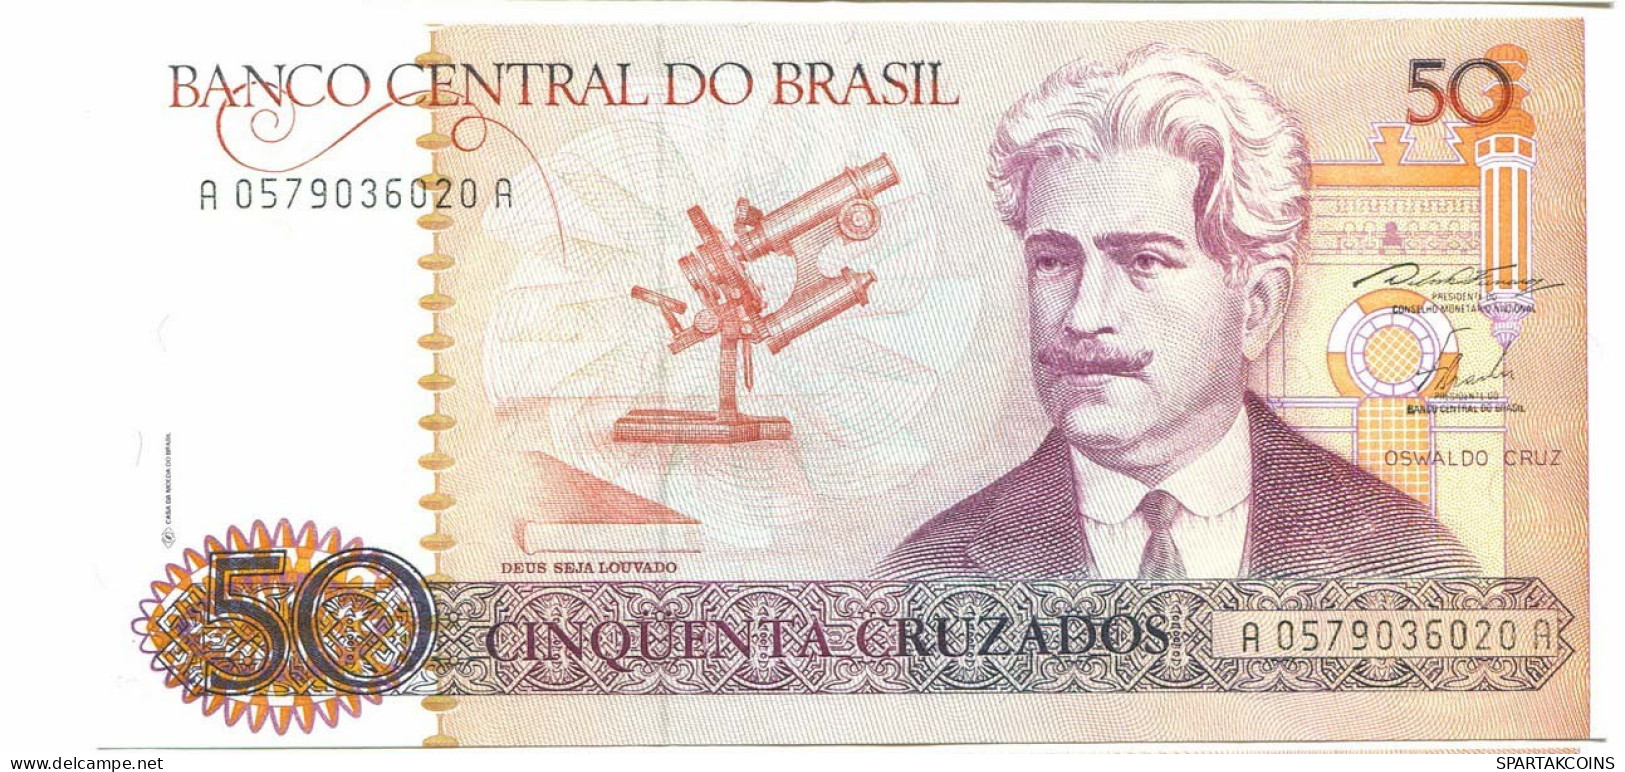 BRASIL 50 CRUZADOS 1986 UNC Paper Money Banknote #P10843.4 - [11] Local Banknote Issues